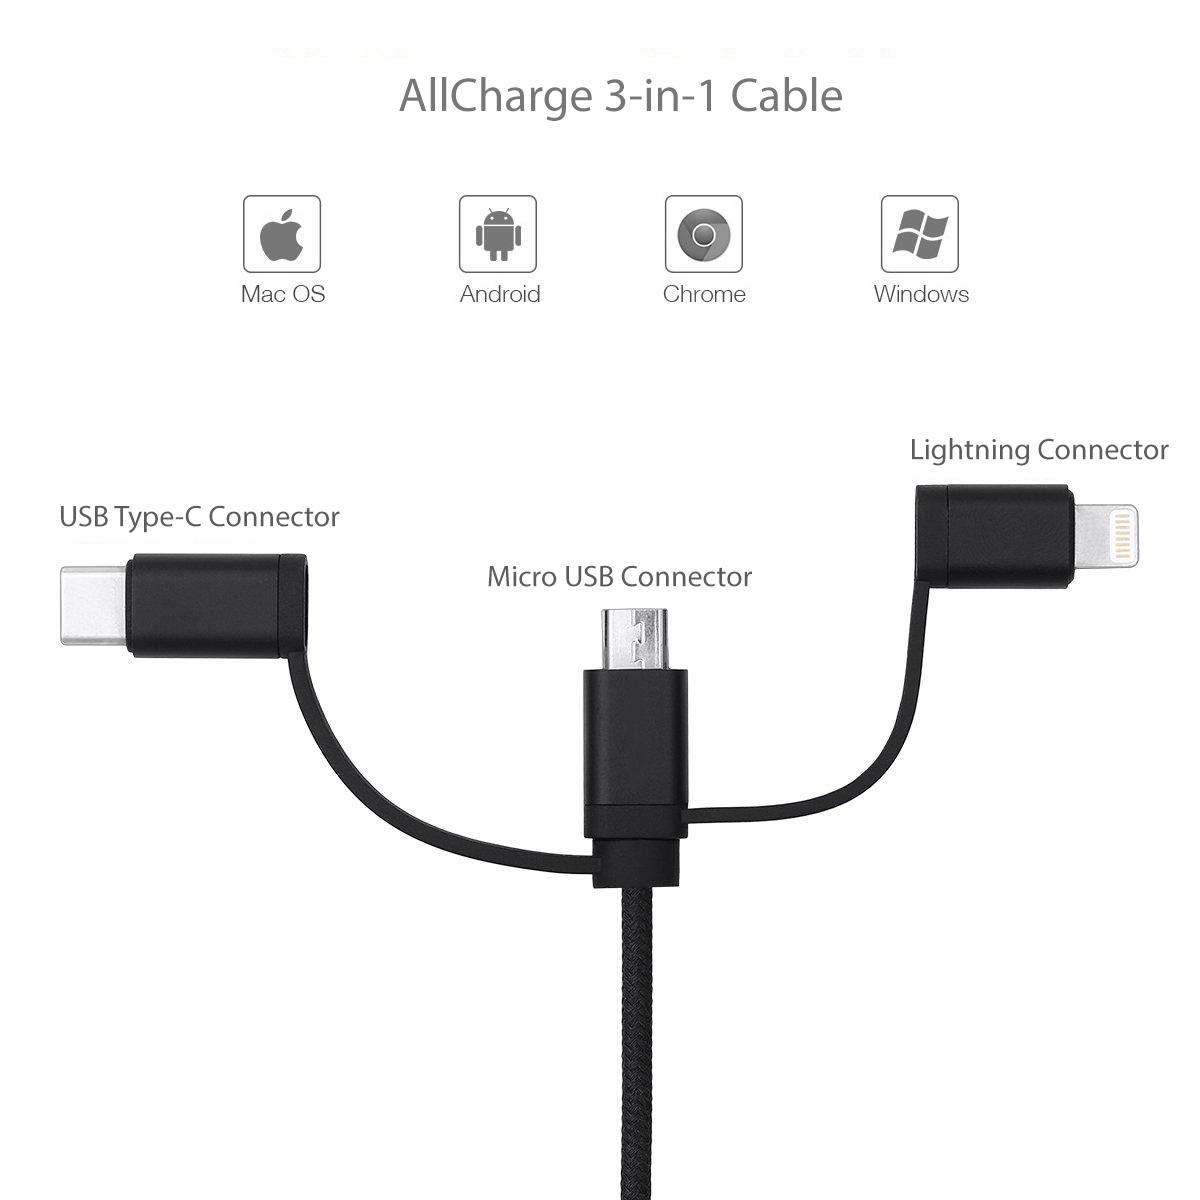 BoxWave Cable Compatible with Anbernic RG353PS (3.5 in) - AllCharge 3-in-1 Cable for Anbernic RG353PS (3.5 in) - Jet Black